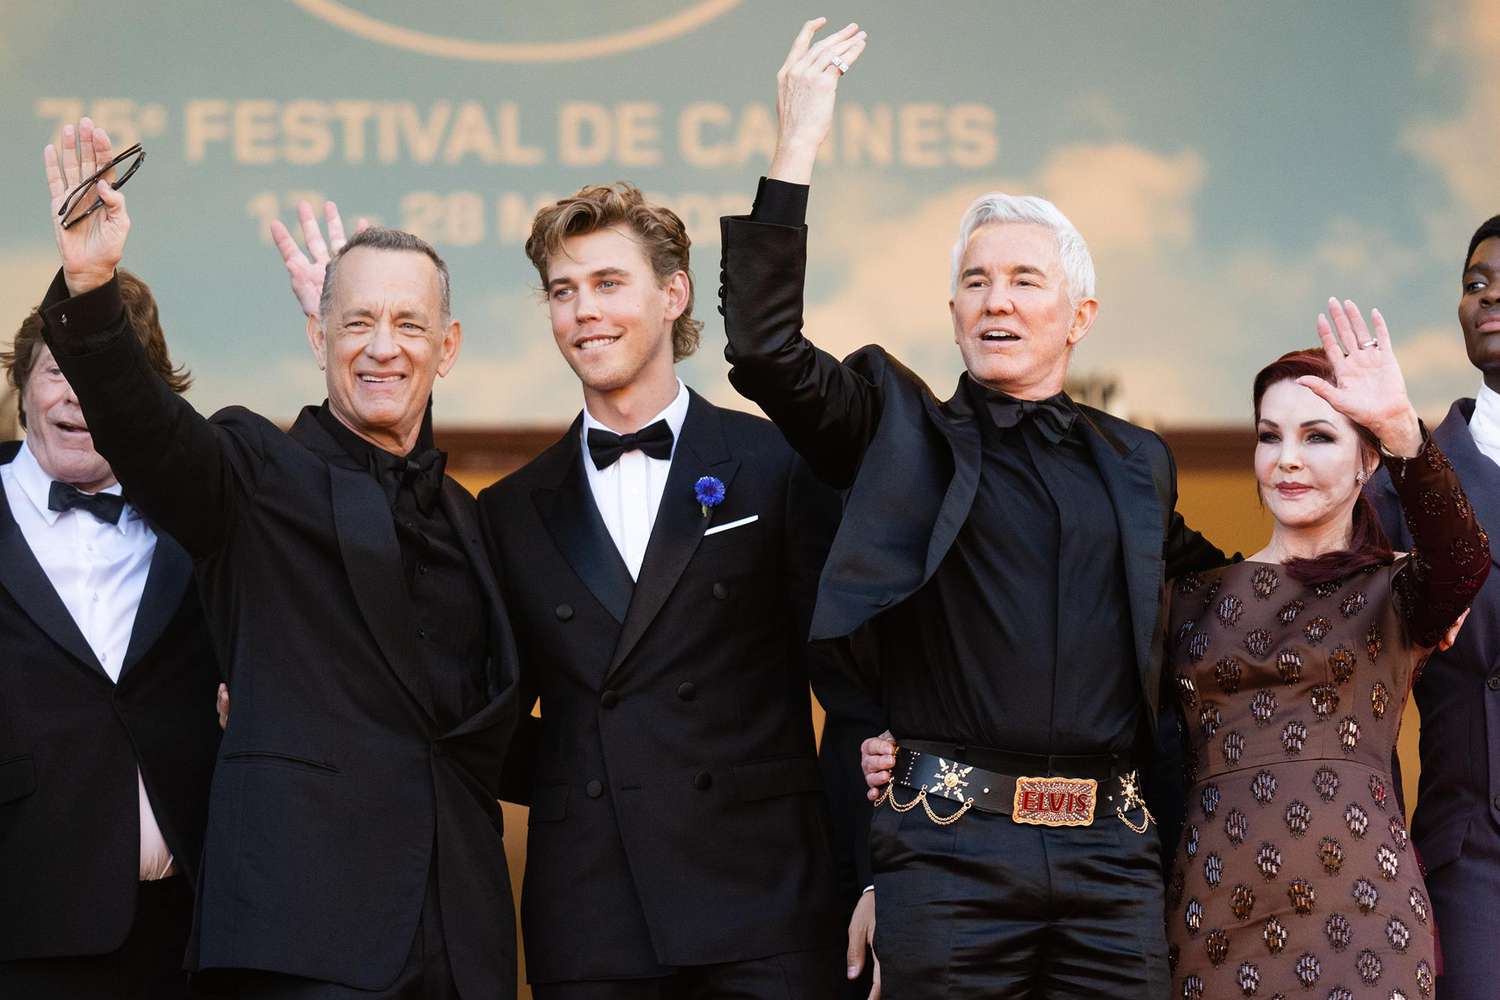 Tom Hanks, Austin Butler, Baz Luhrmann and Priscilla Presley attend the screening of "Elvis" during the 75th annual Cannes film festival at Palais des Festivals on May 25, 2022 in Cannes, France.